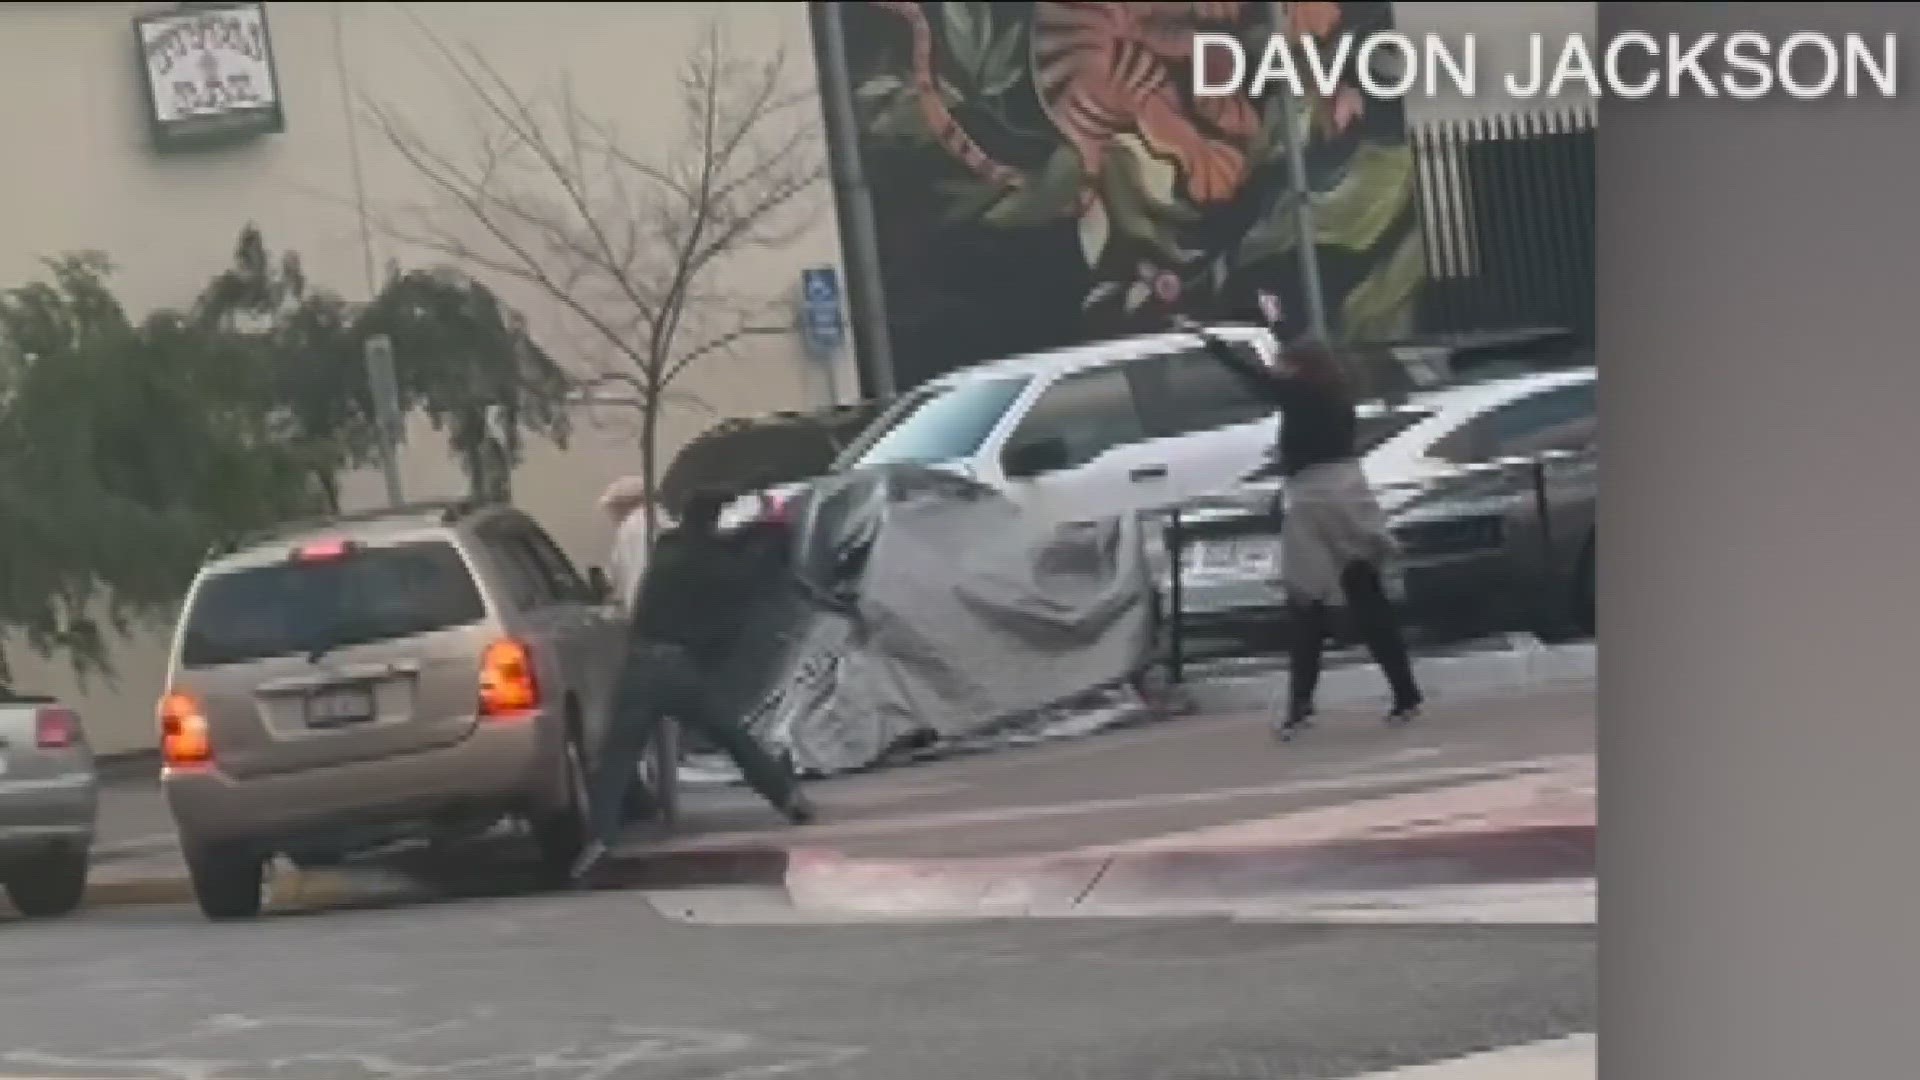 Video shared with CBS 8 showed a brown SUV driving erratically onto the sidewalk where a bat-wielding man was standing.